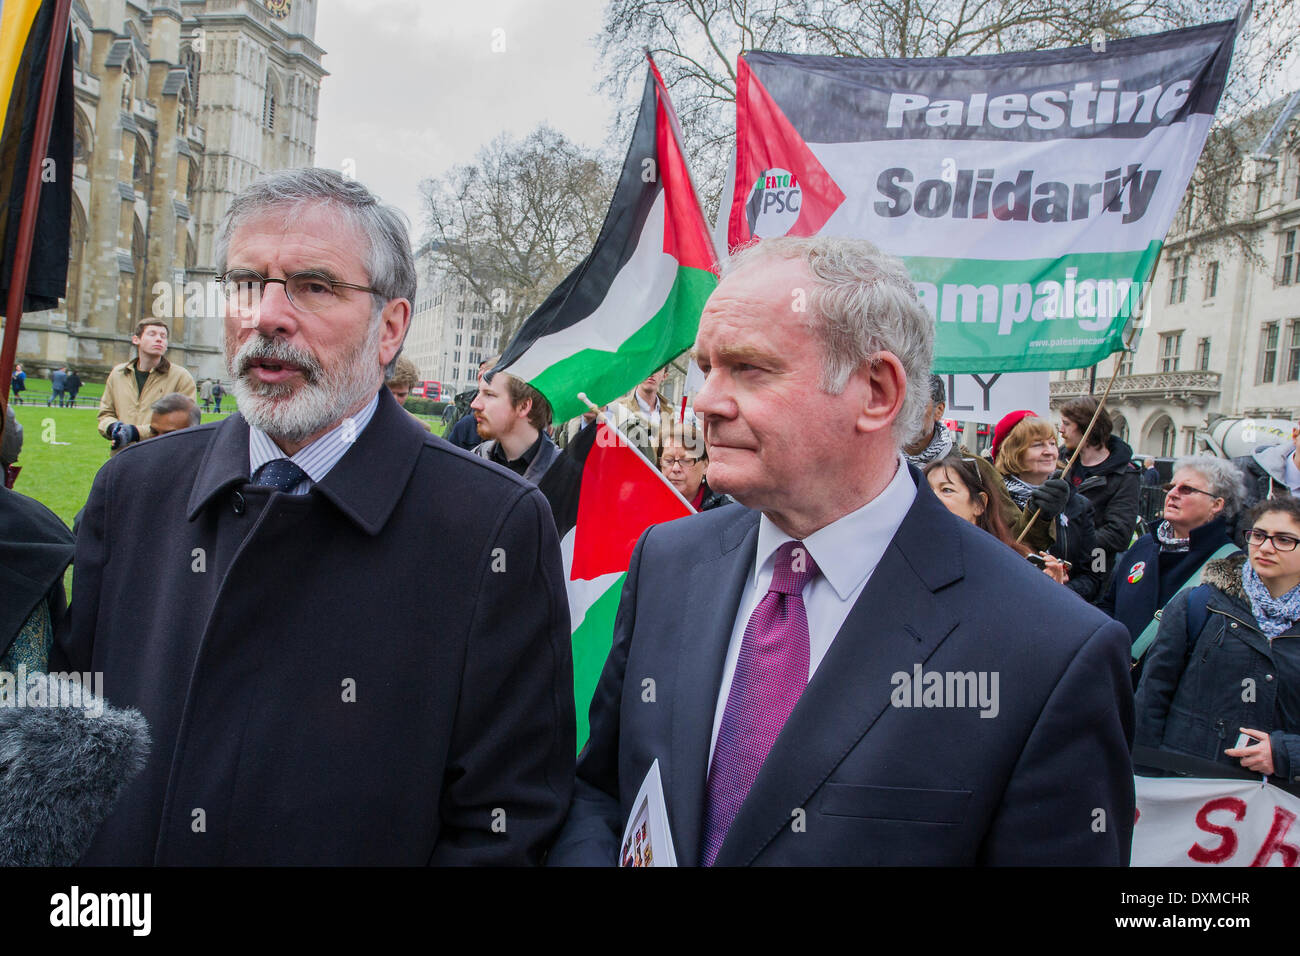 London, UK . 27th Mar, 2014. Gerry Adams and Martin McGuiness. Tony Benn's funeral at 11.00am at St Margaret's Church, Westminster. His body was brought in a hearse from the main gates of New Palace Yard at 10.45am, and was followed by members of his family on foot. The rout was lined by admirers. On arrival at the gates it was carried into the church by members of the family. Thursday 27th March 2014, London, UK. Credit:  Guy Bell/Alamy Live News Stock Photo